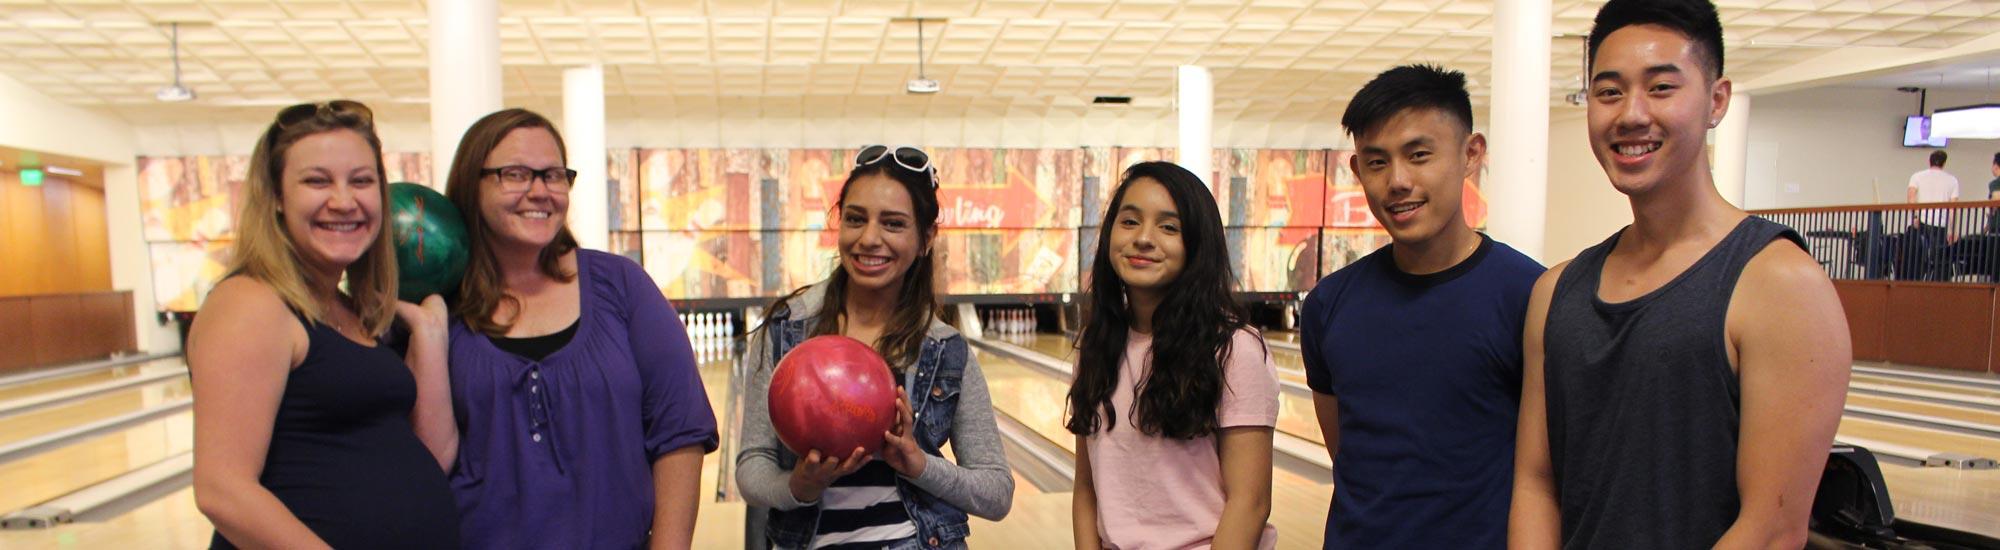 Students at a bowling event